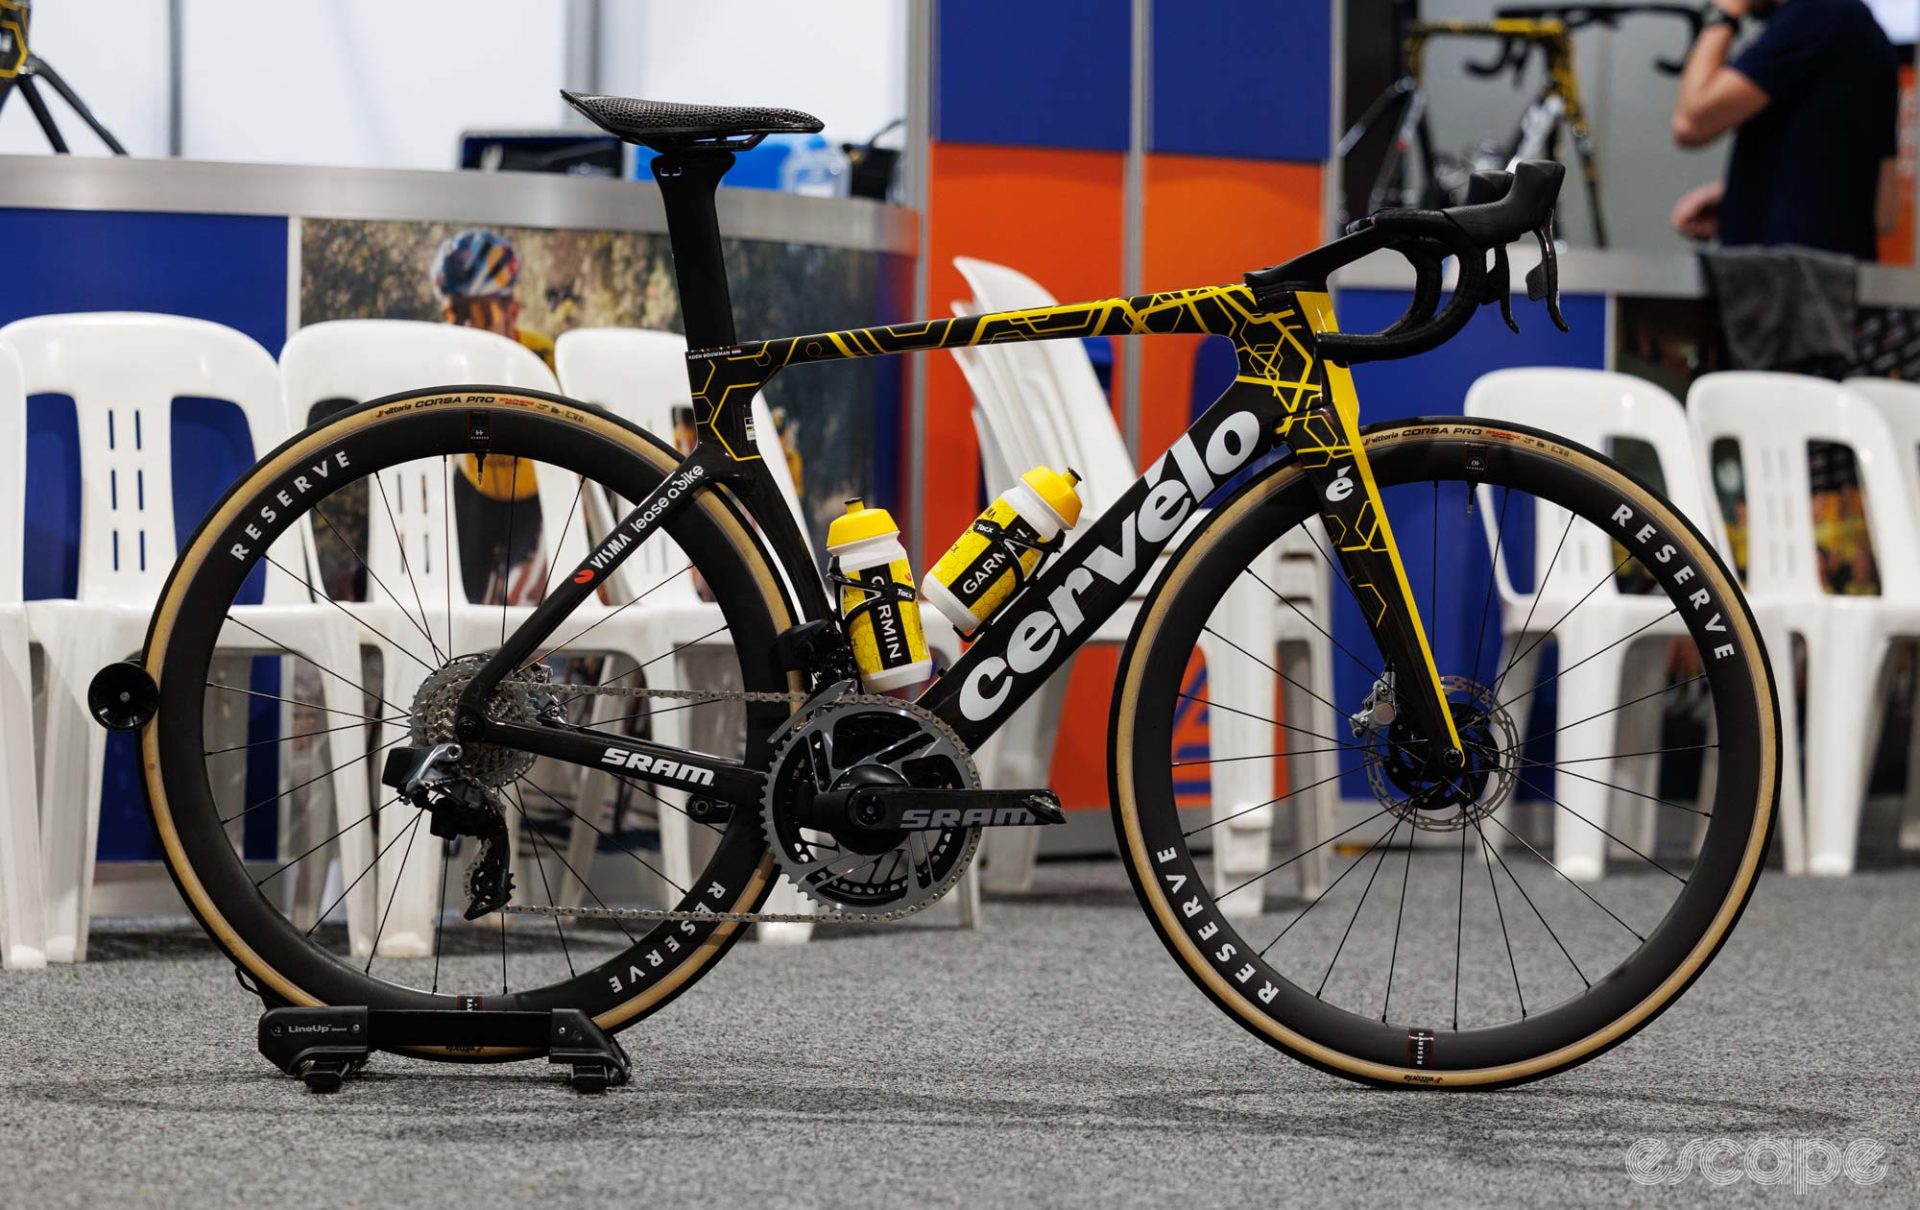 Visma-Lease a Bike's Cervelo S5 in black and yellow geometric-pattern paint. It has Reserve wheels and a SRAM Red group.